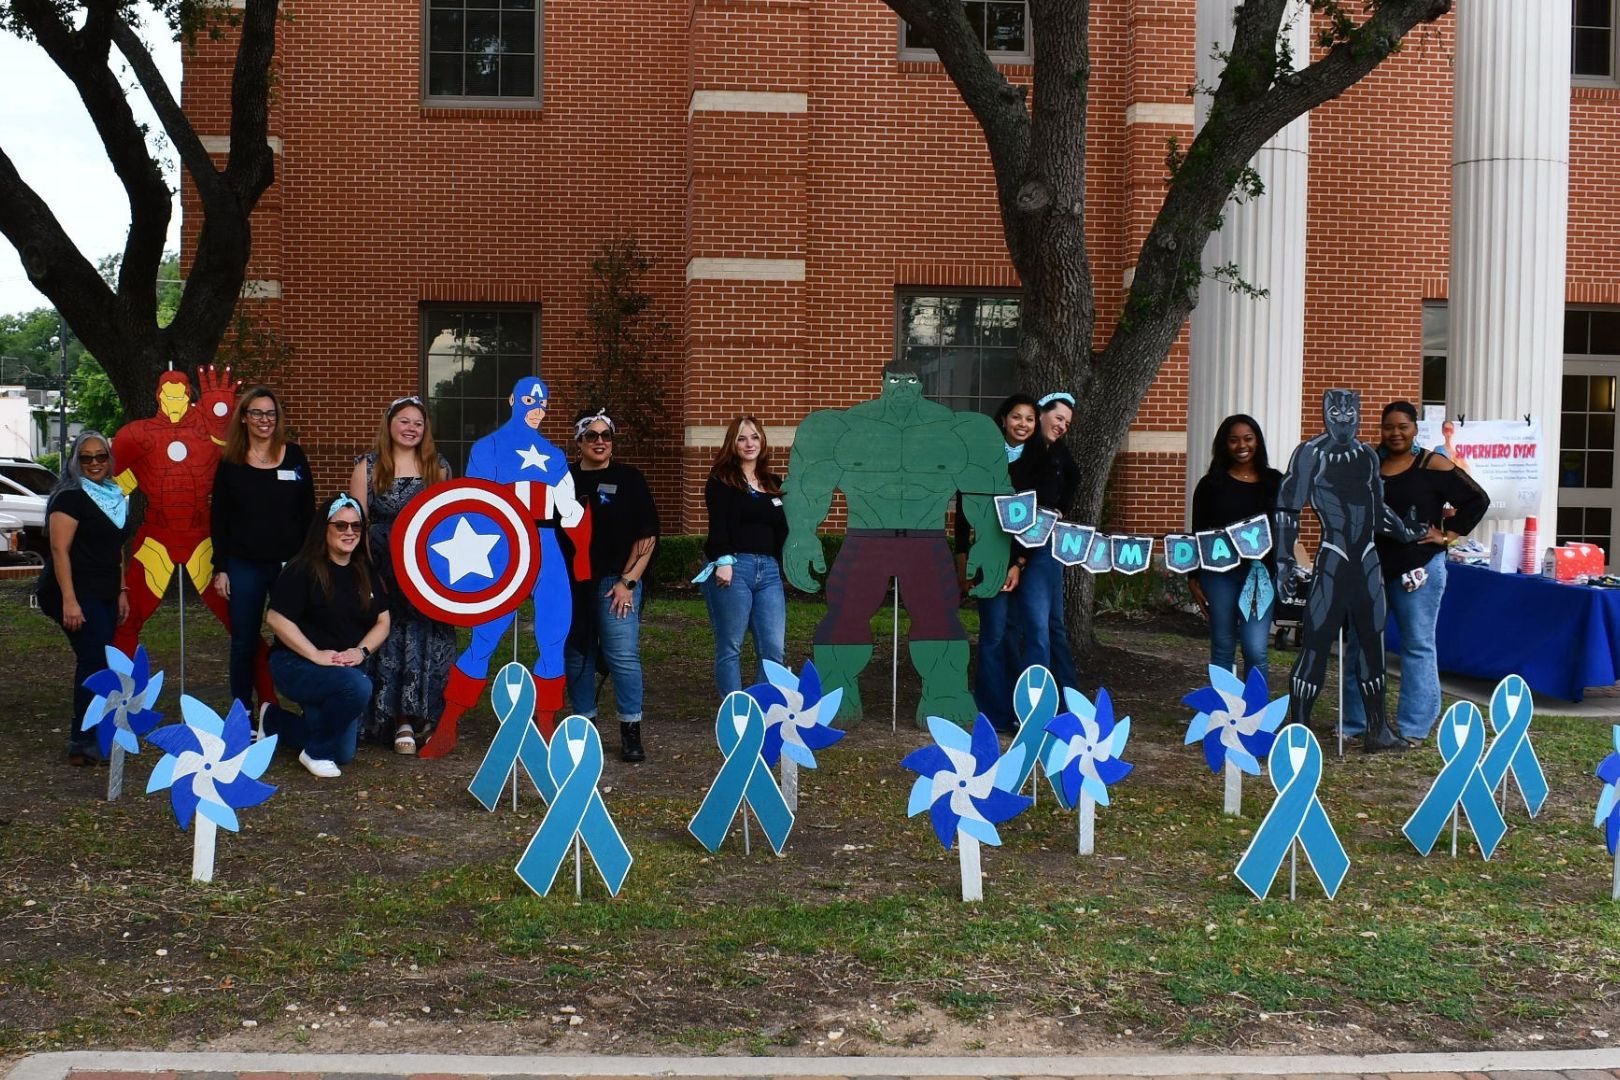 Katy Christian Ministries Hosts Second Annual Superhero Event at City Hall in Katy